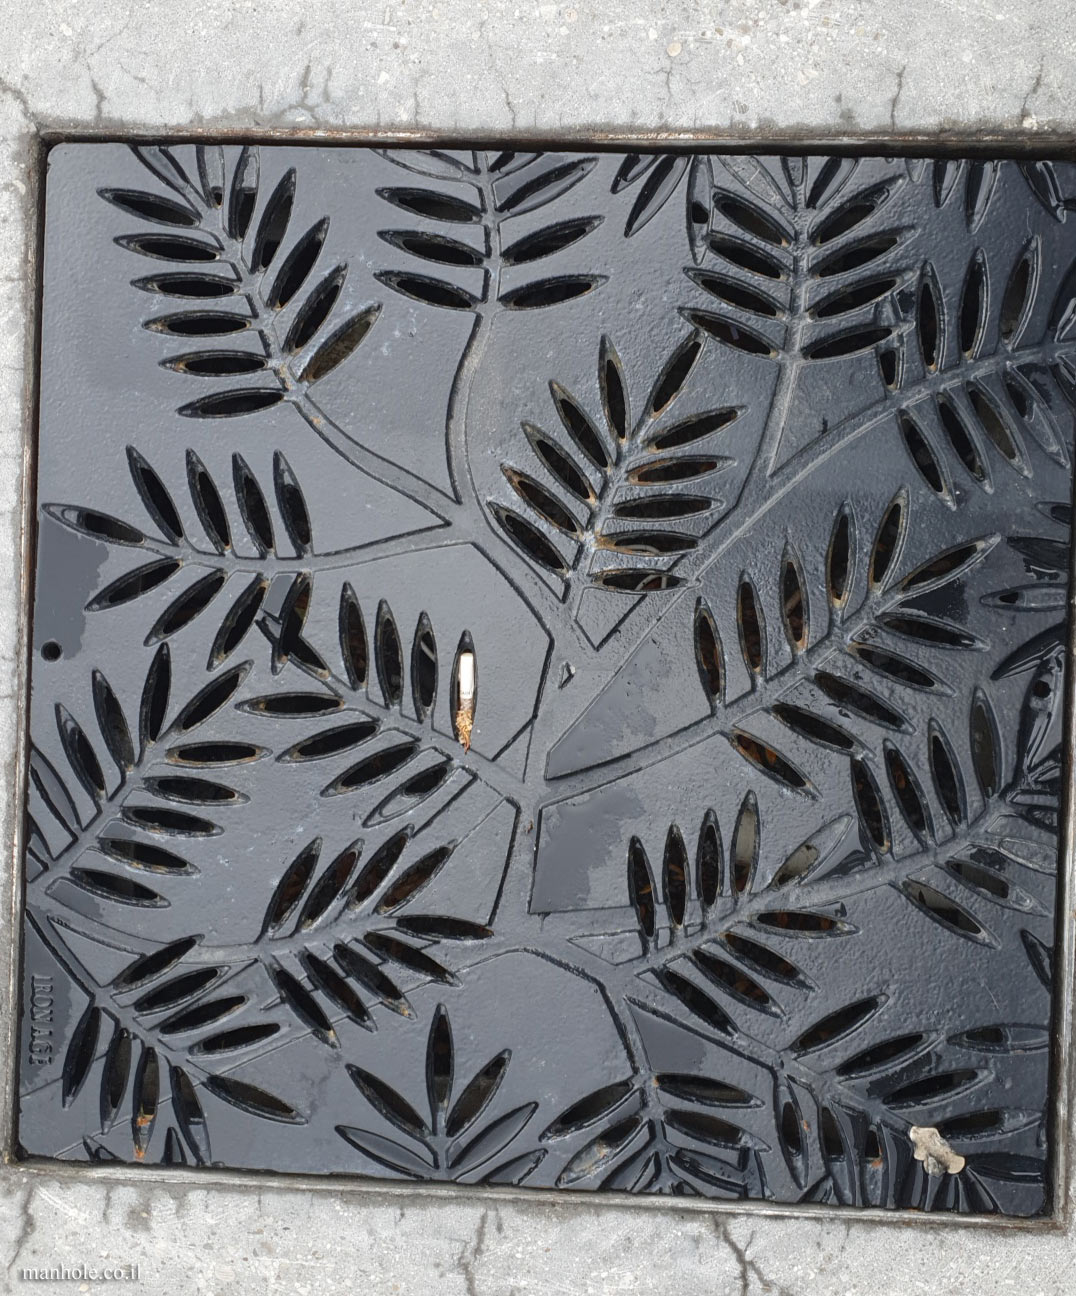 Ottawa - Drain cover with grooves in the shape of tree leaves